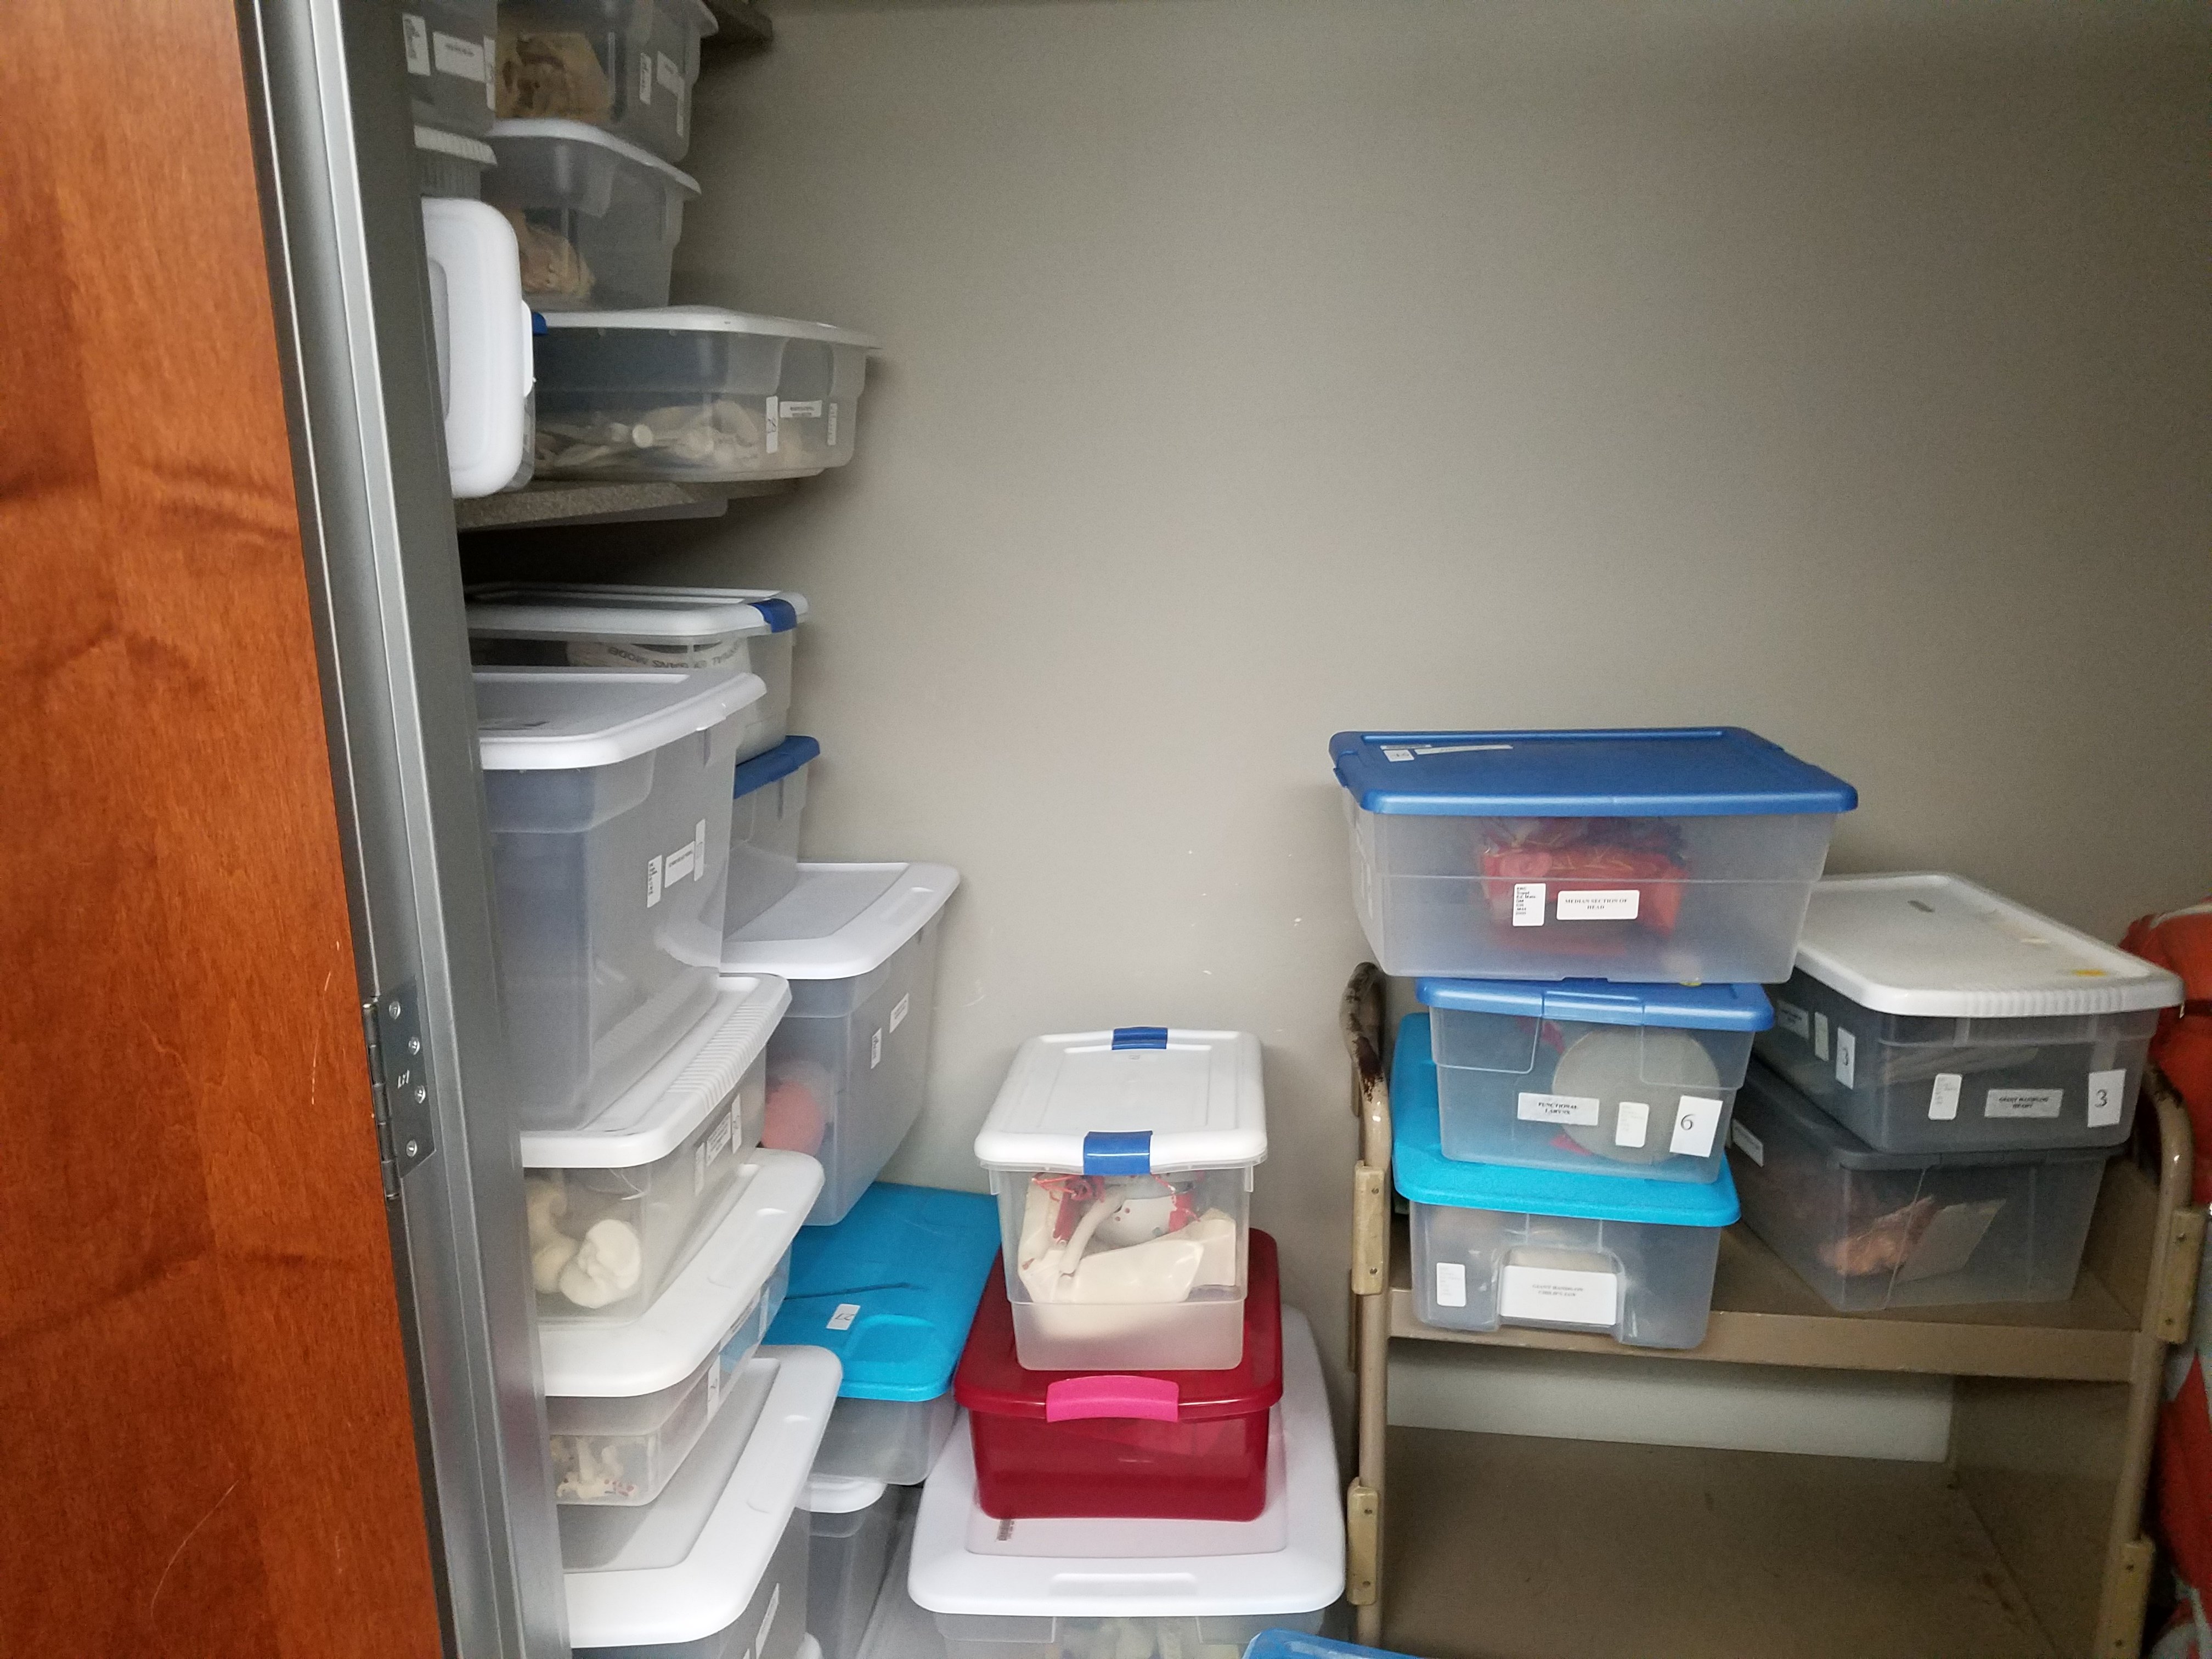 Anatomy room bins with inventory